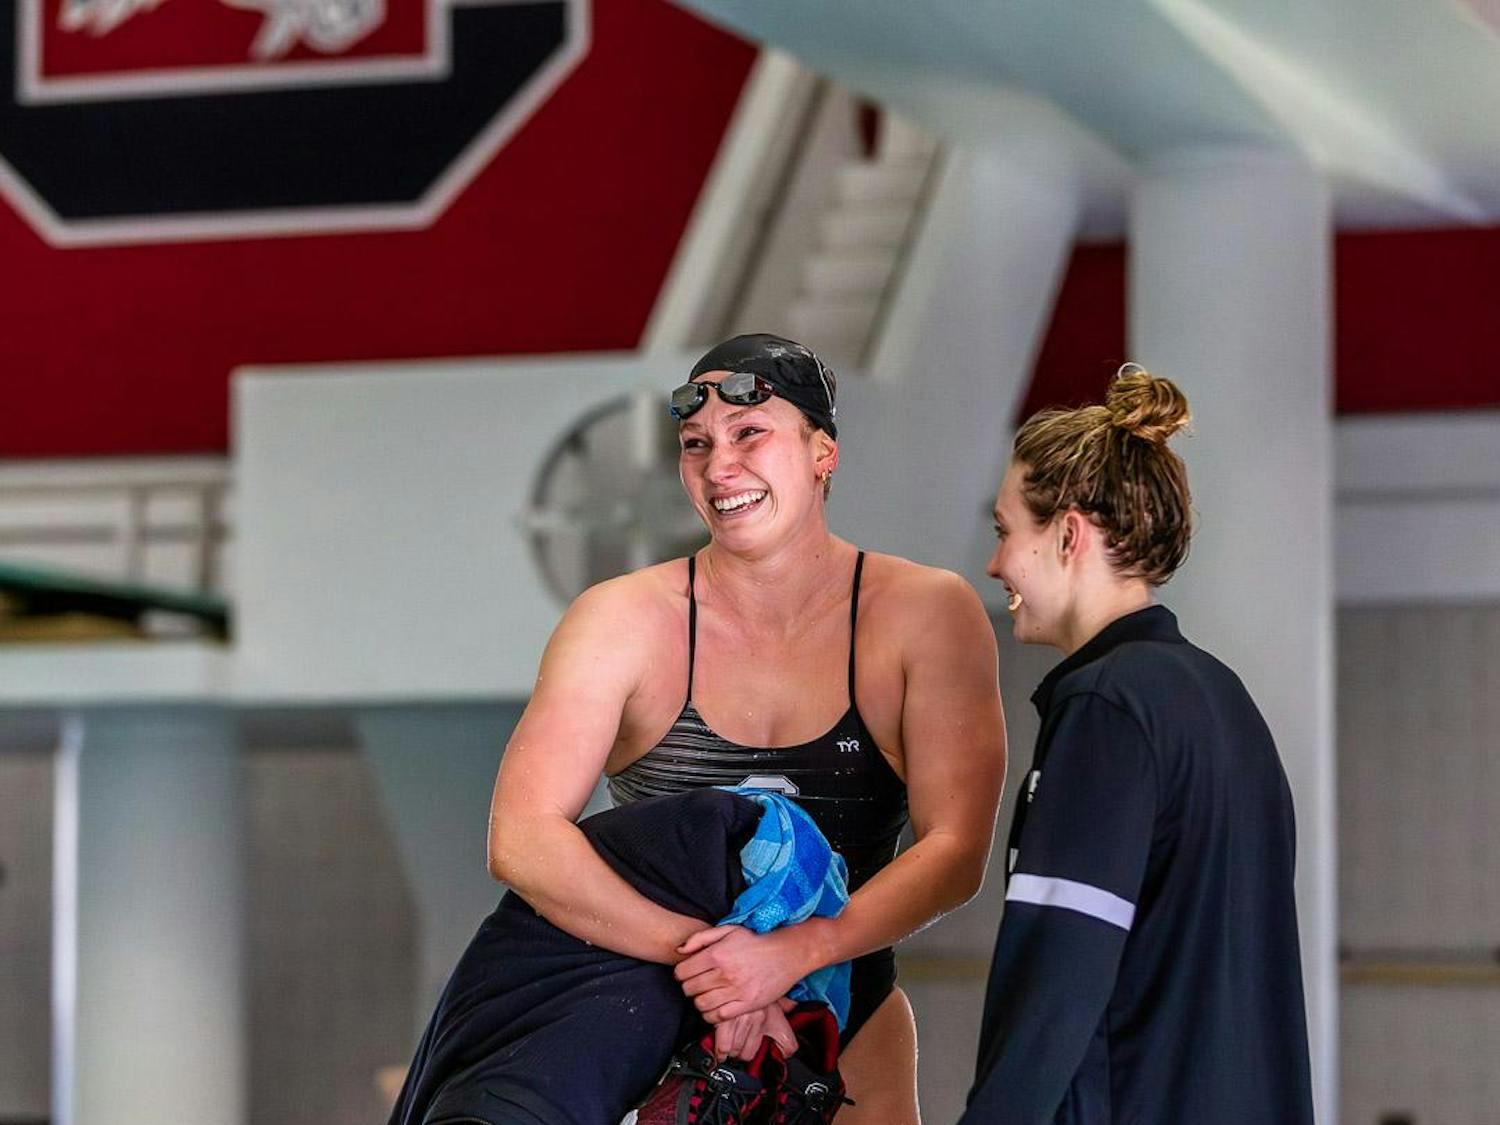 Senior Hayley Mason (left) tries to hold back tears after completing the 500-meter freestyle event against Duke University and UNC Asheville on Jan. 20, 2024. Mason and other senior team members expressed a range of emotions during their last competition at the Carolina Natatorium.